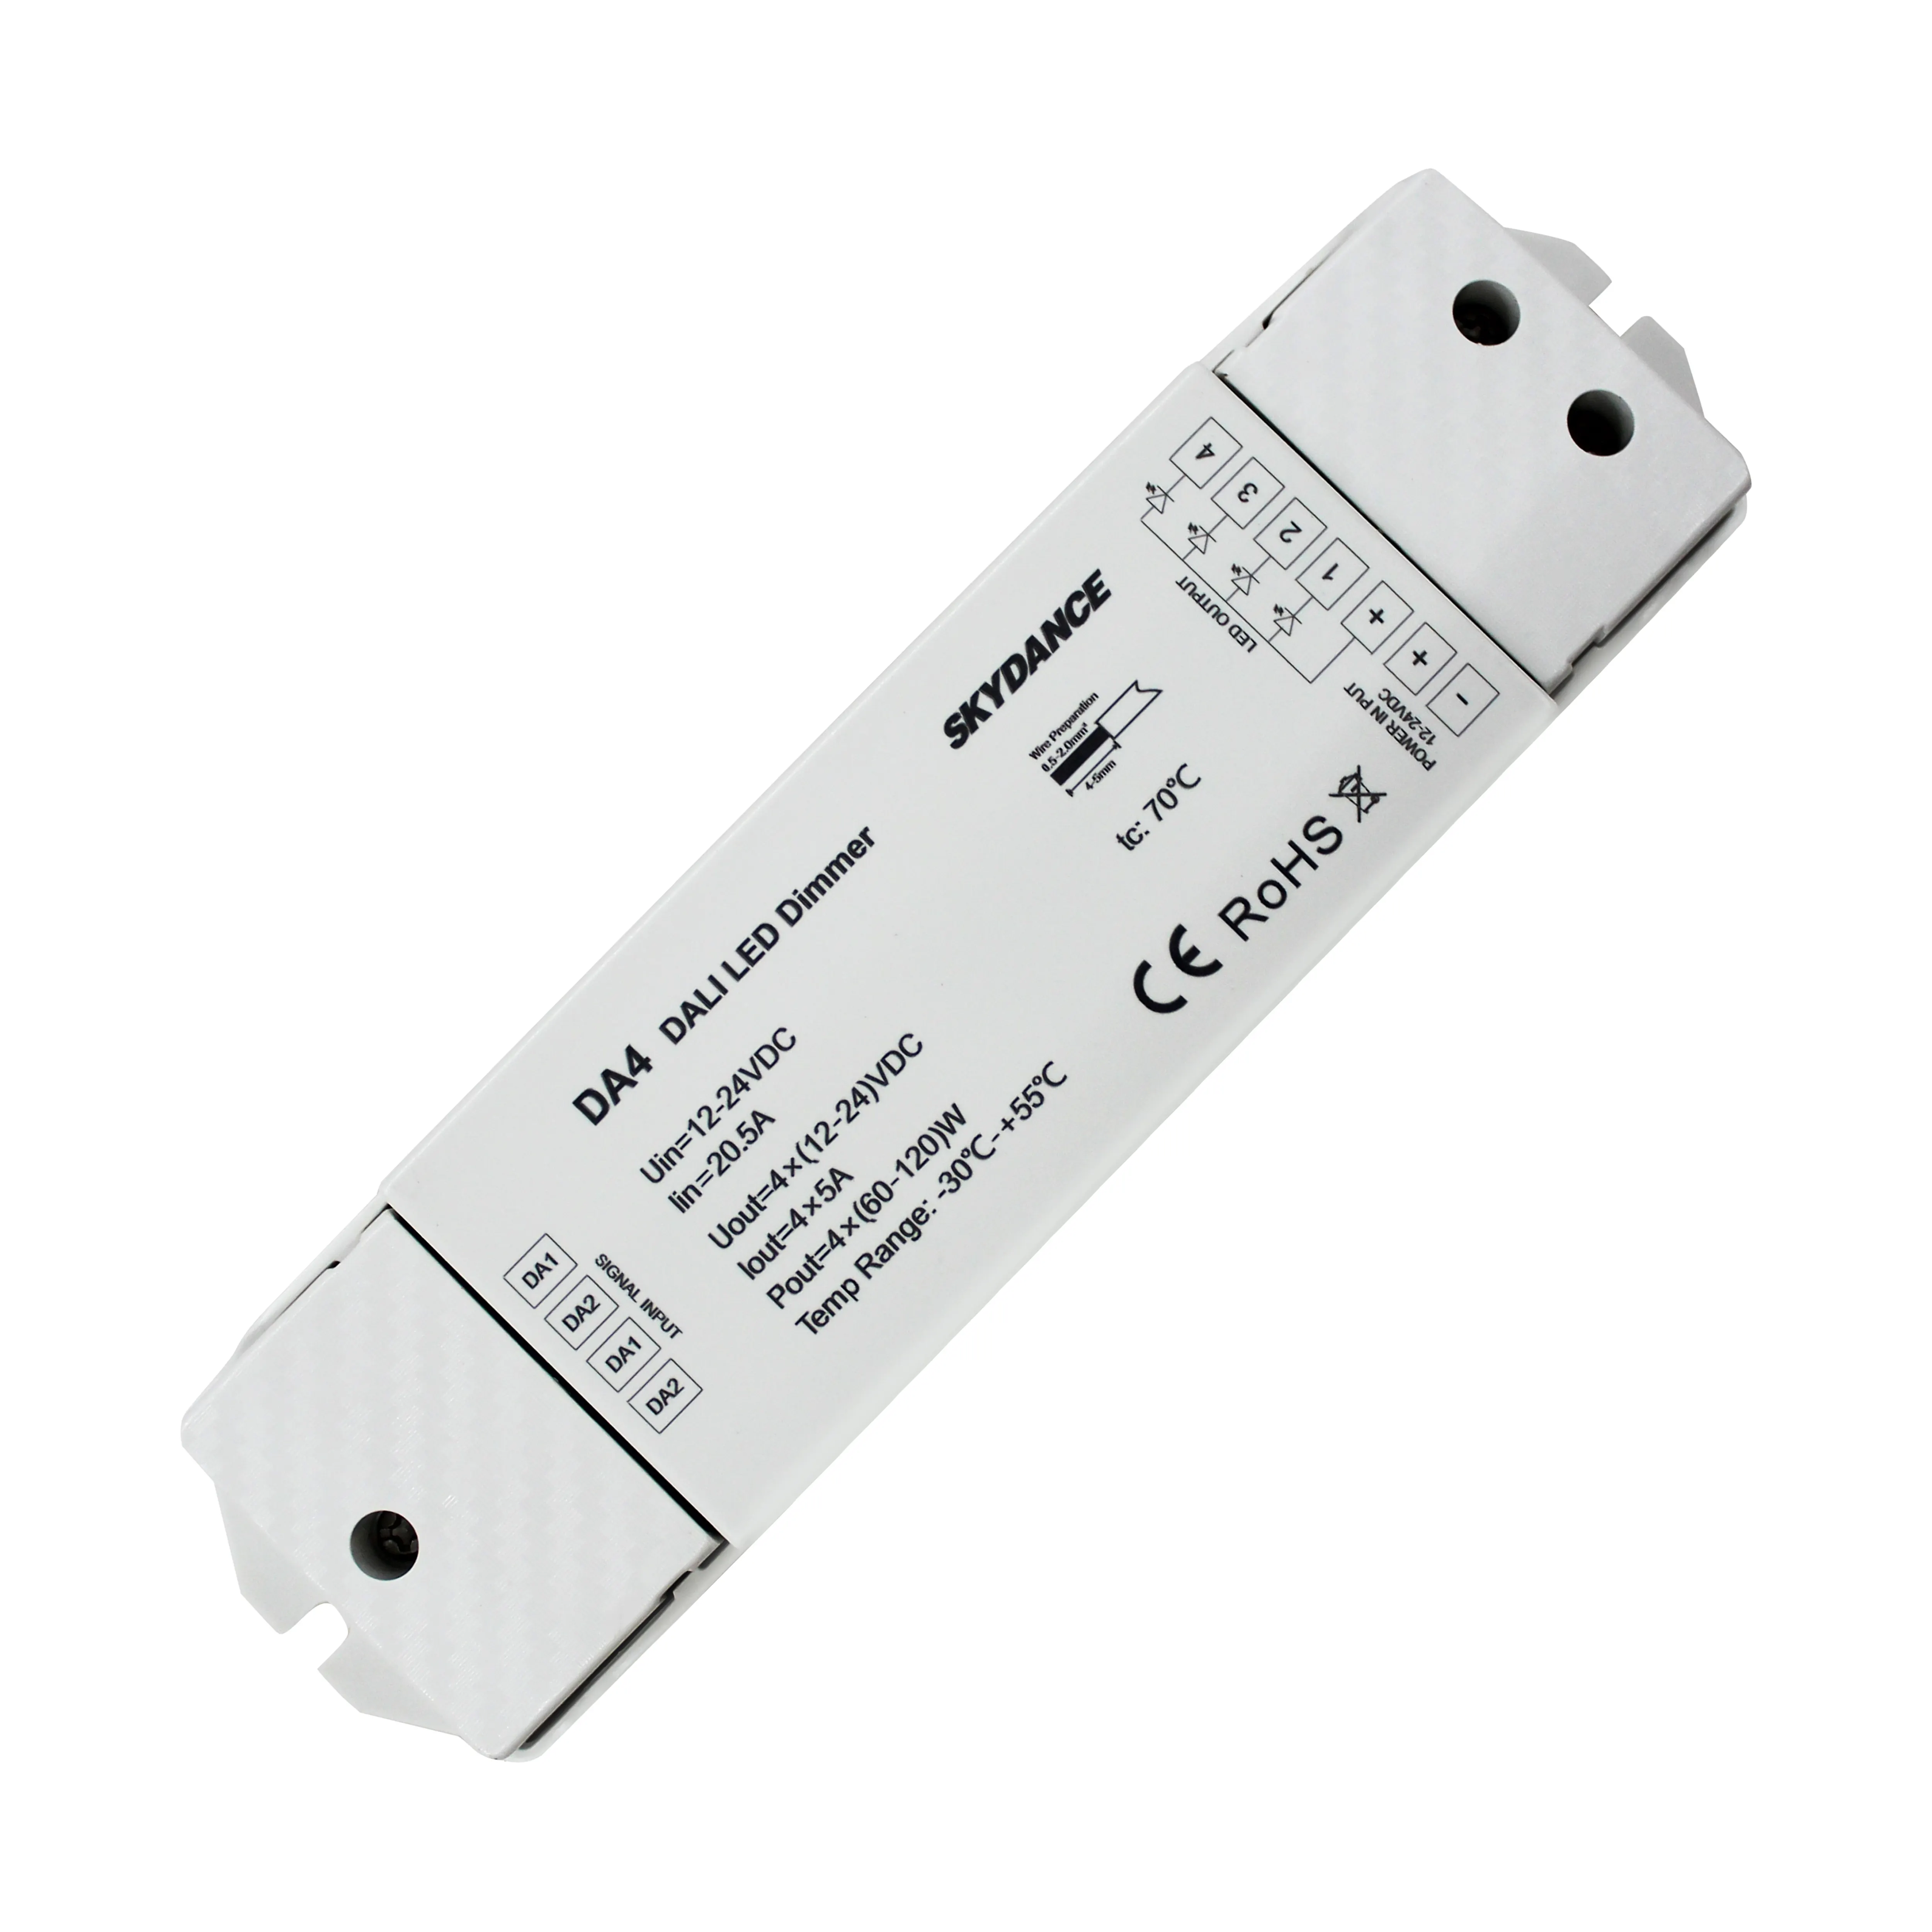 DA4 DC12-24V 20A 4 channel DALI LED Dimmer Controller With Push-dim Switch for RGB RGBW led strip light